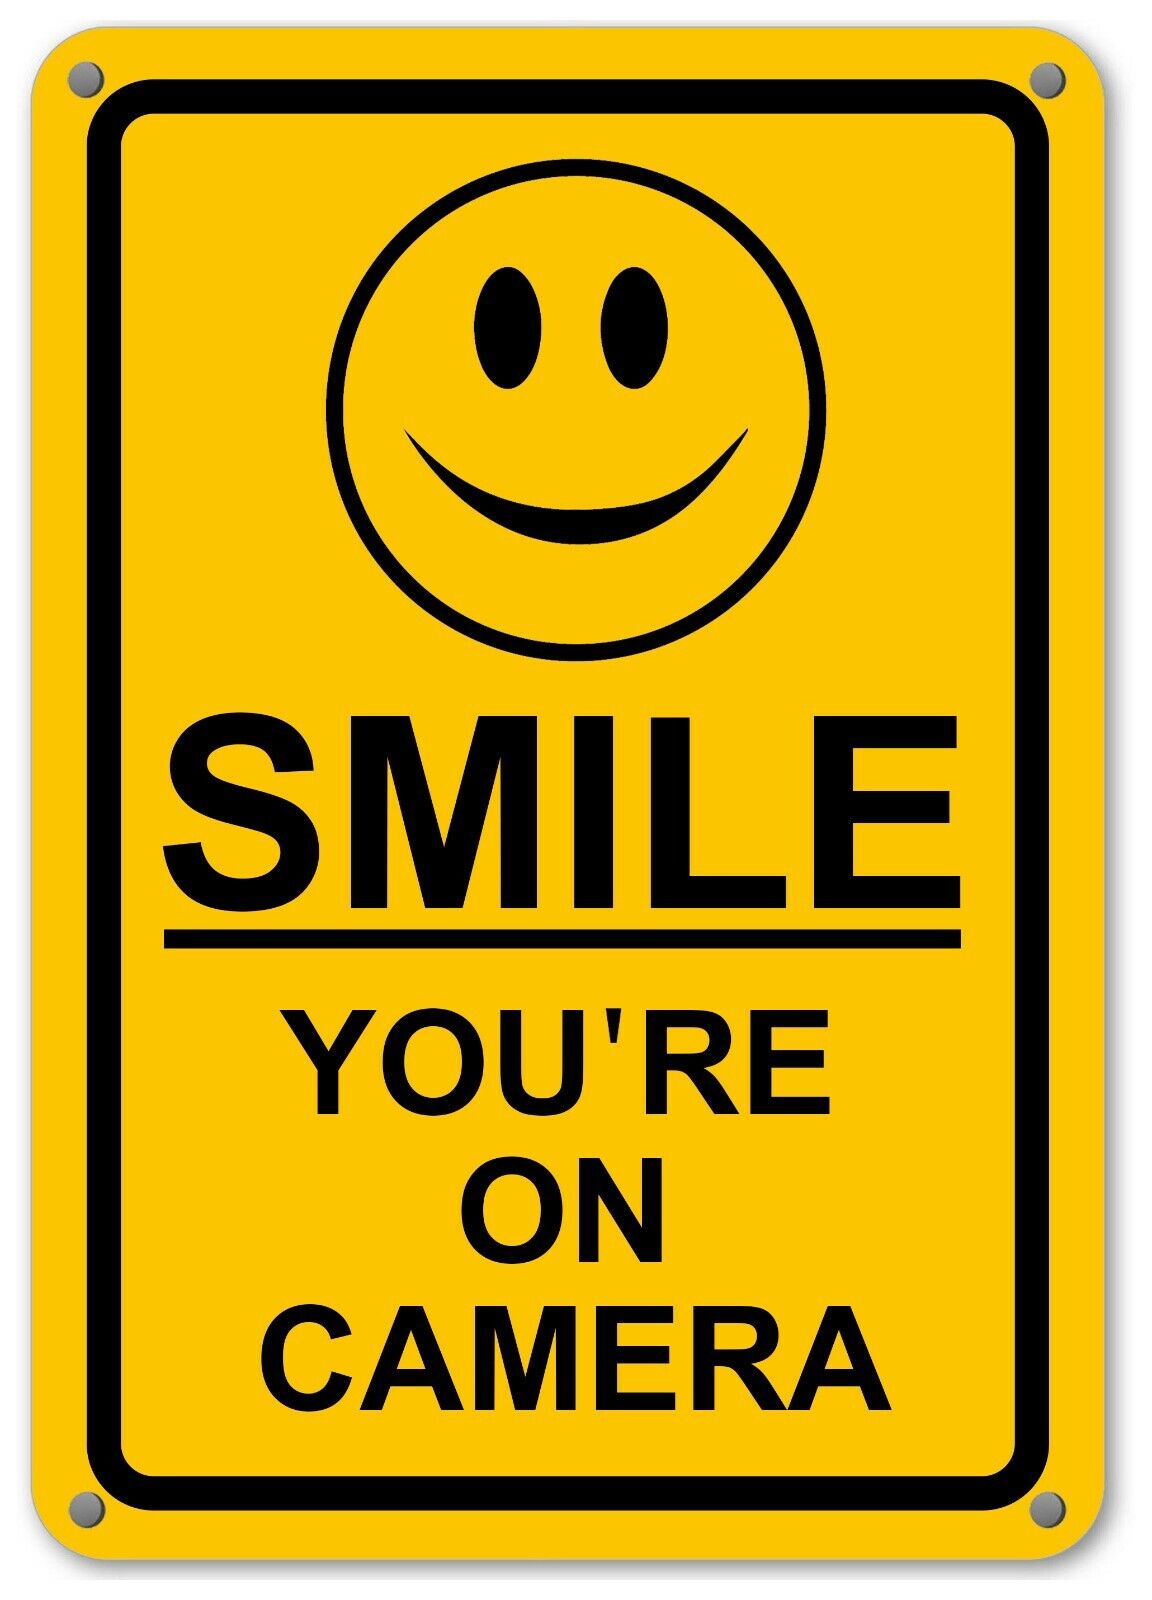 New Smile You're on Camera Yellow Business Security Sign CCTV Video Surveillance